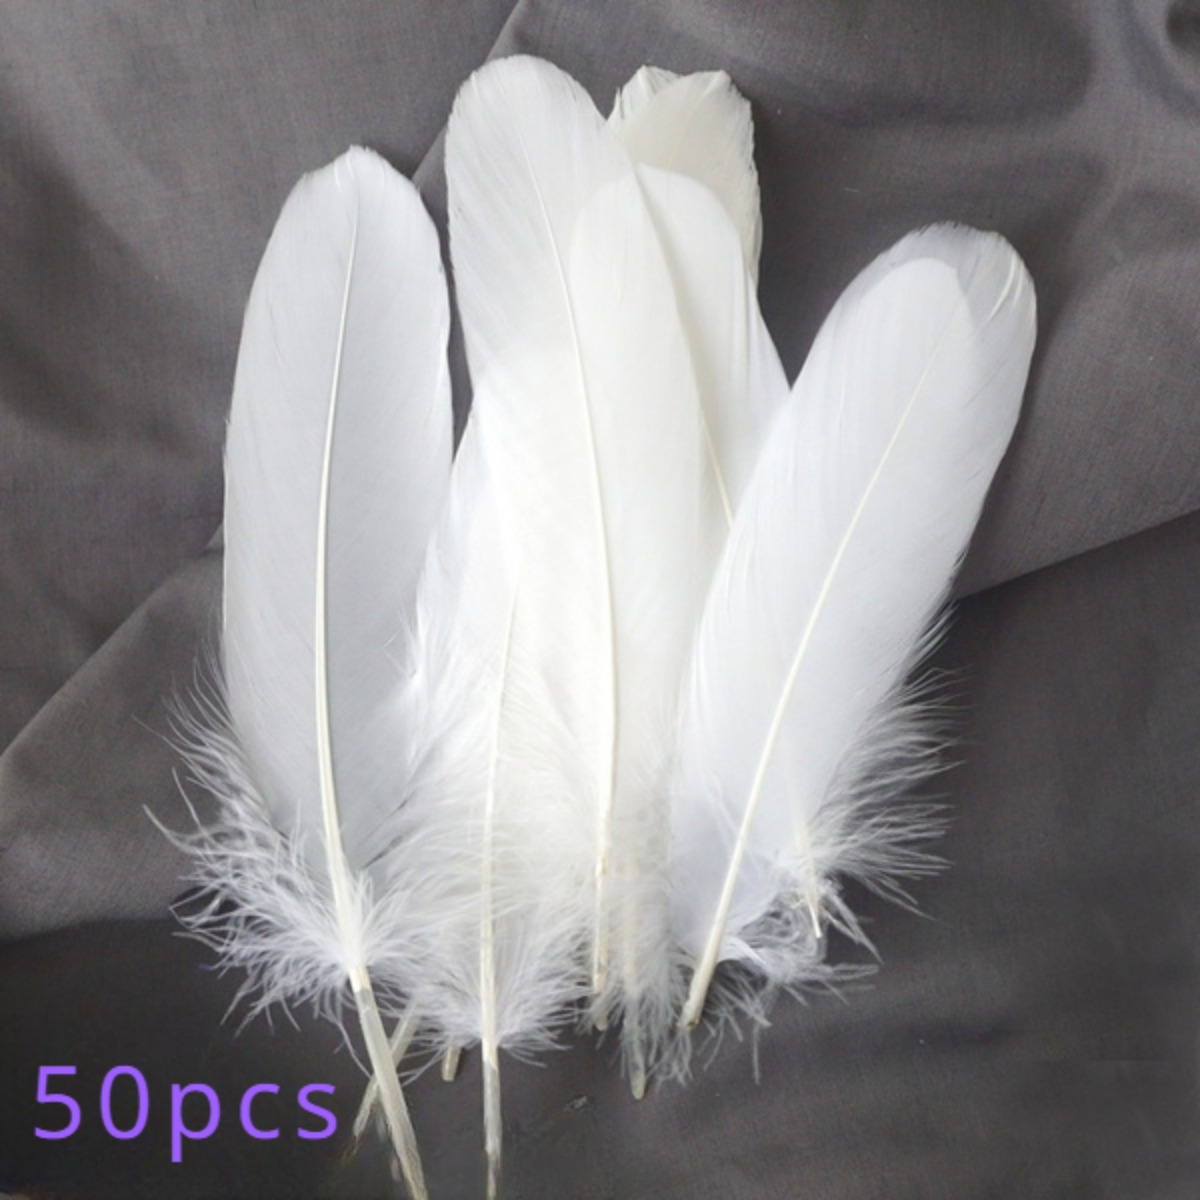 500 Pcs Halloween Black Assorted Crafts Feathers 4 Styles Mixed Feathers  Black Feathers for Crafts Chicken Turkey Goose Feathers Supplies for DIY